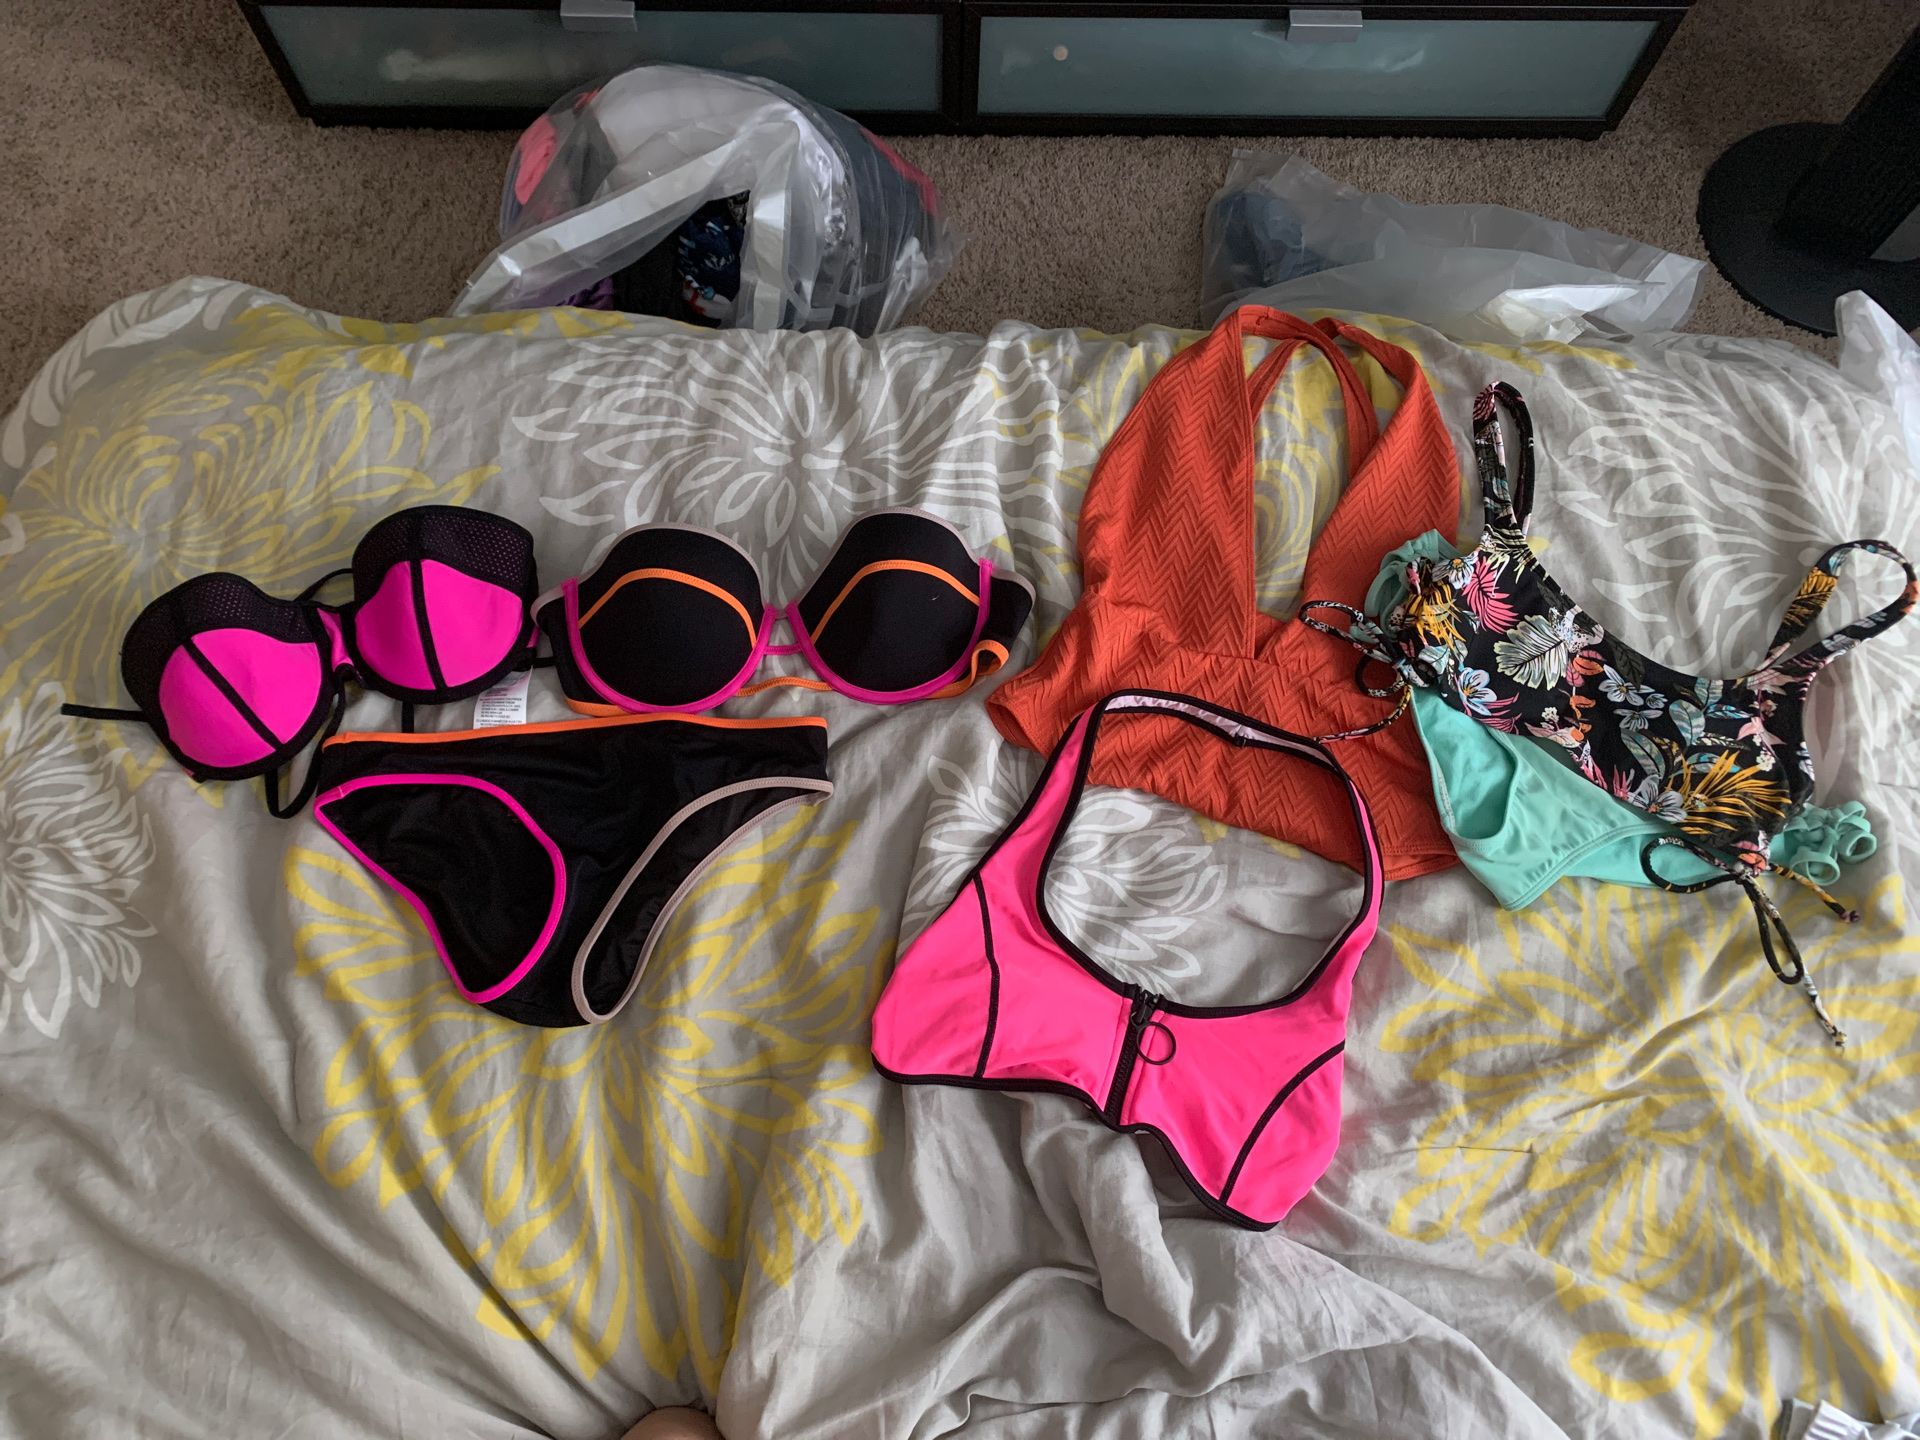 Mix and match bathing suits